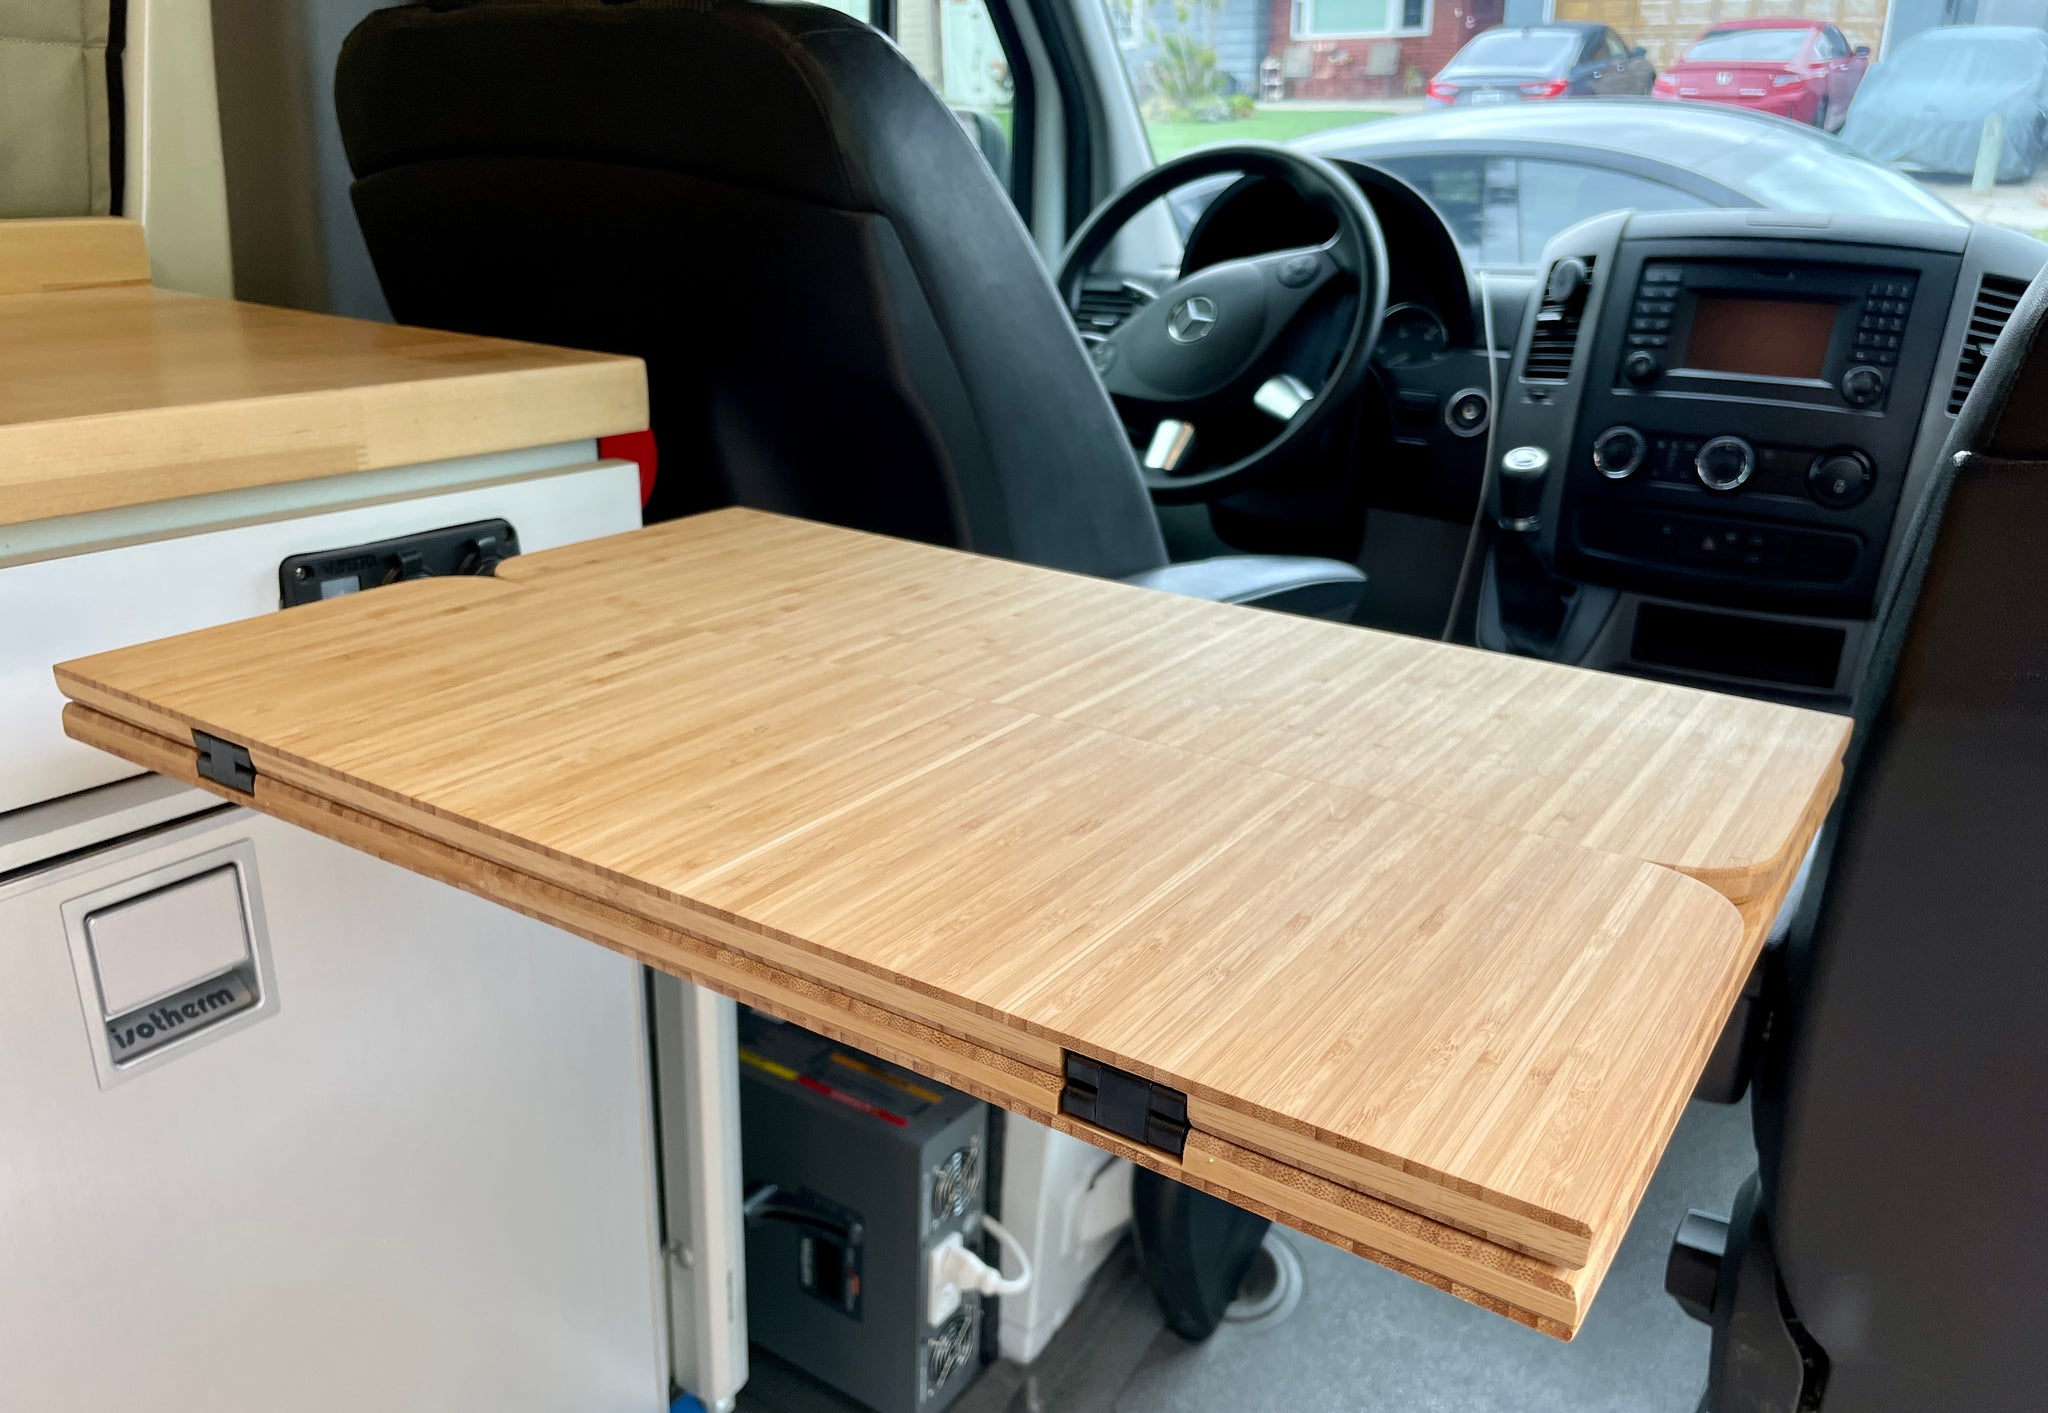 Folding Bamboo Lagun Table For Camper Vans and RVs